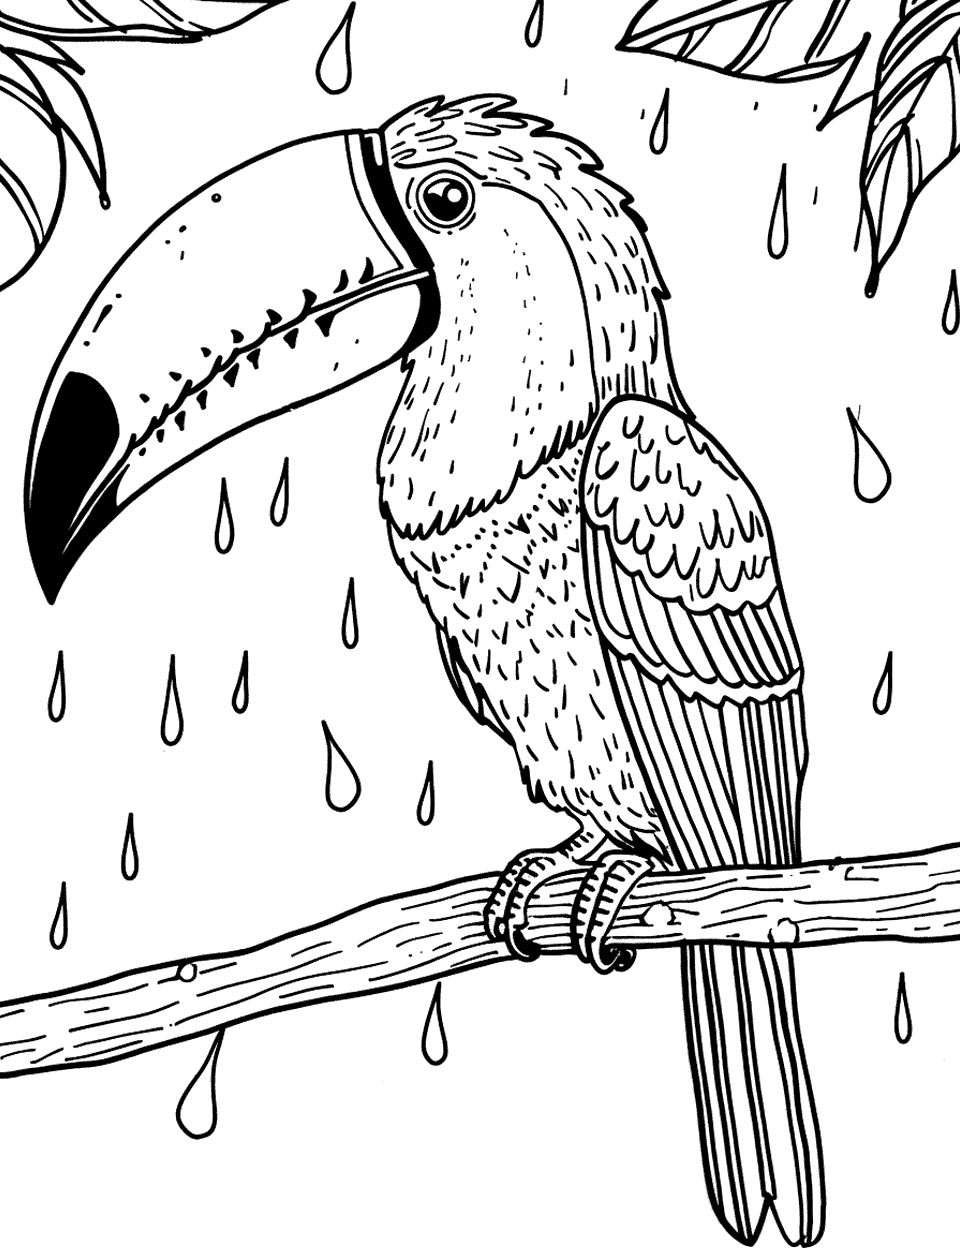 Toucan Bird Watching the Rain Parrot Coloring Page - A toucan perched quietly as simple raindrops fall around it.